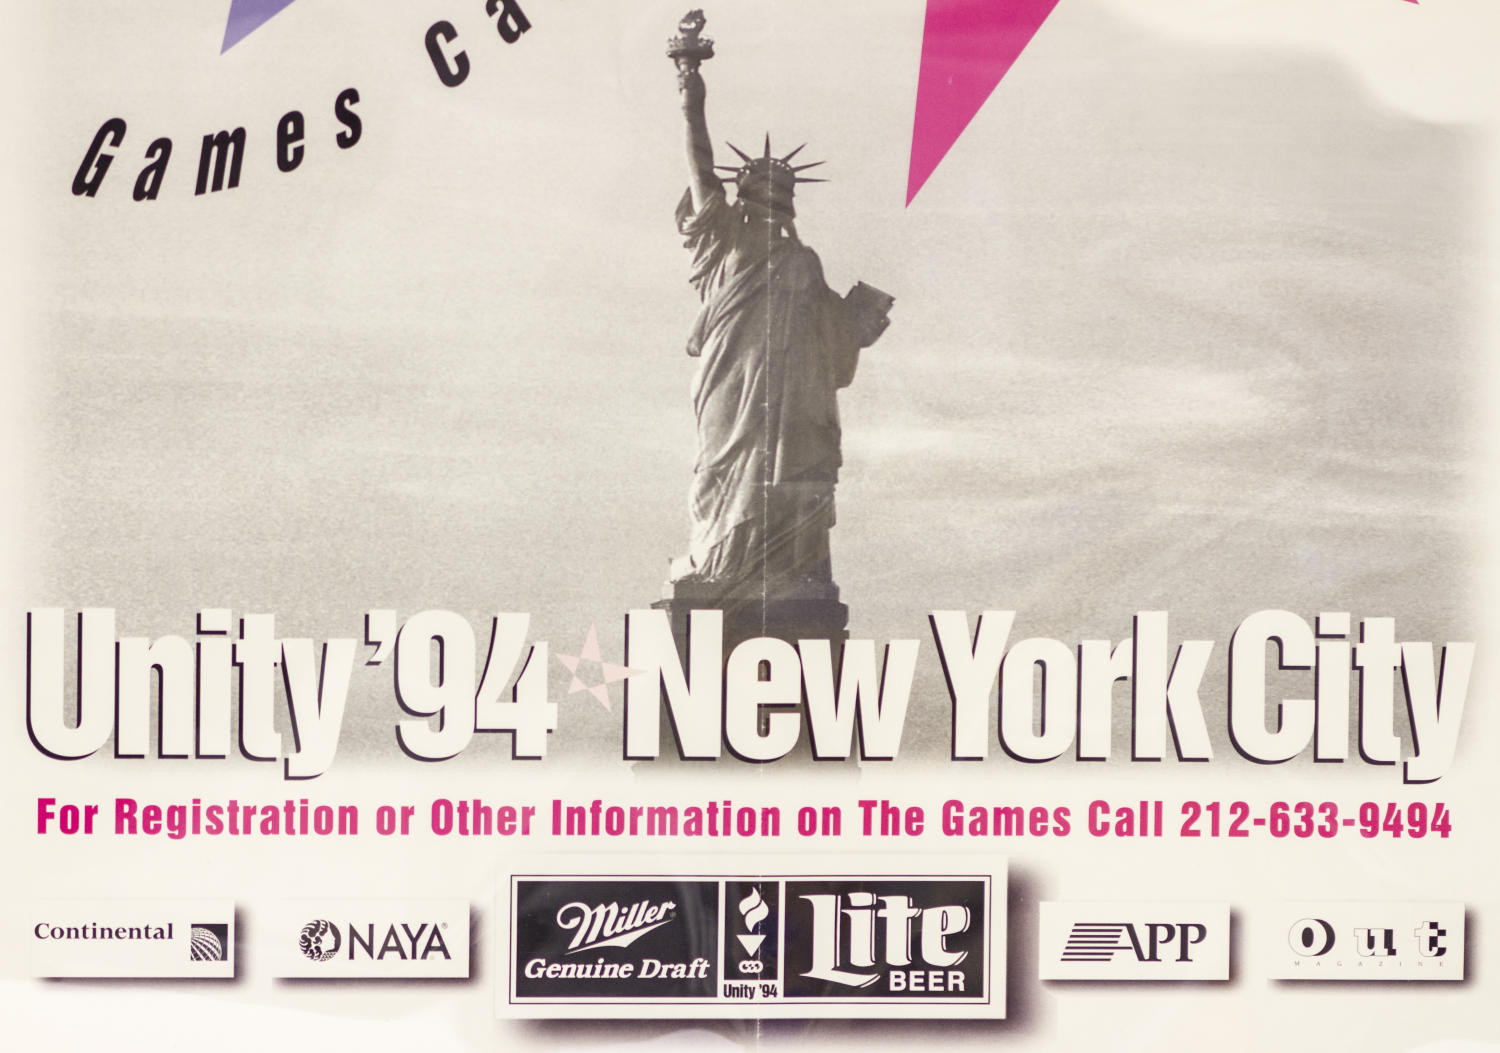 [Close-Up of Gay Games IV Unity Poster]
                                                
                                                    [Sequence #]: 1 of 1
                                                